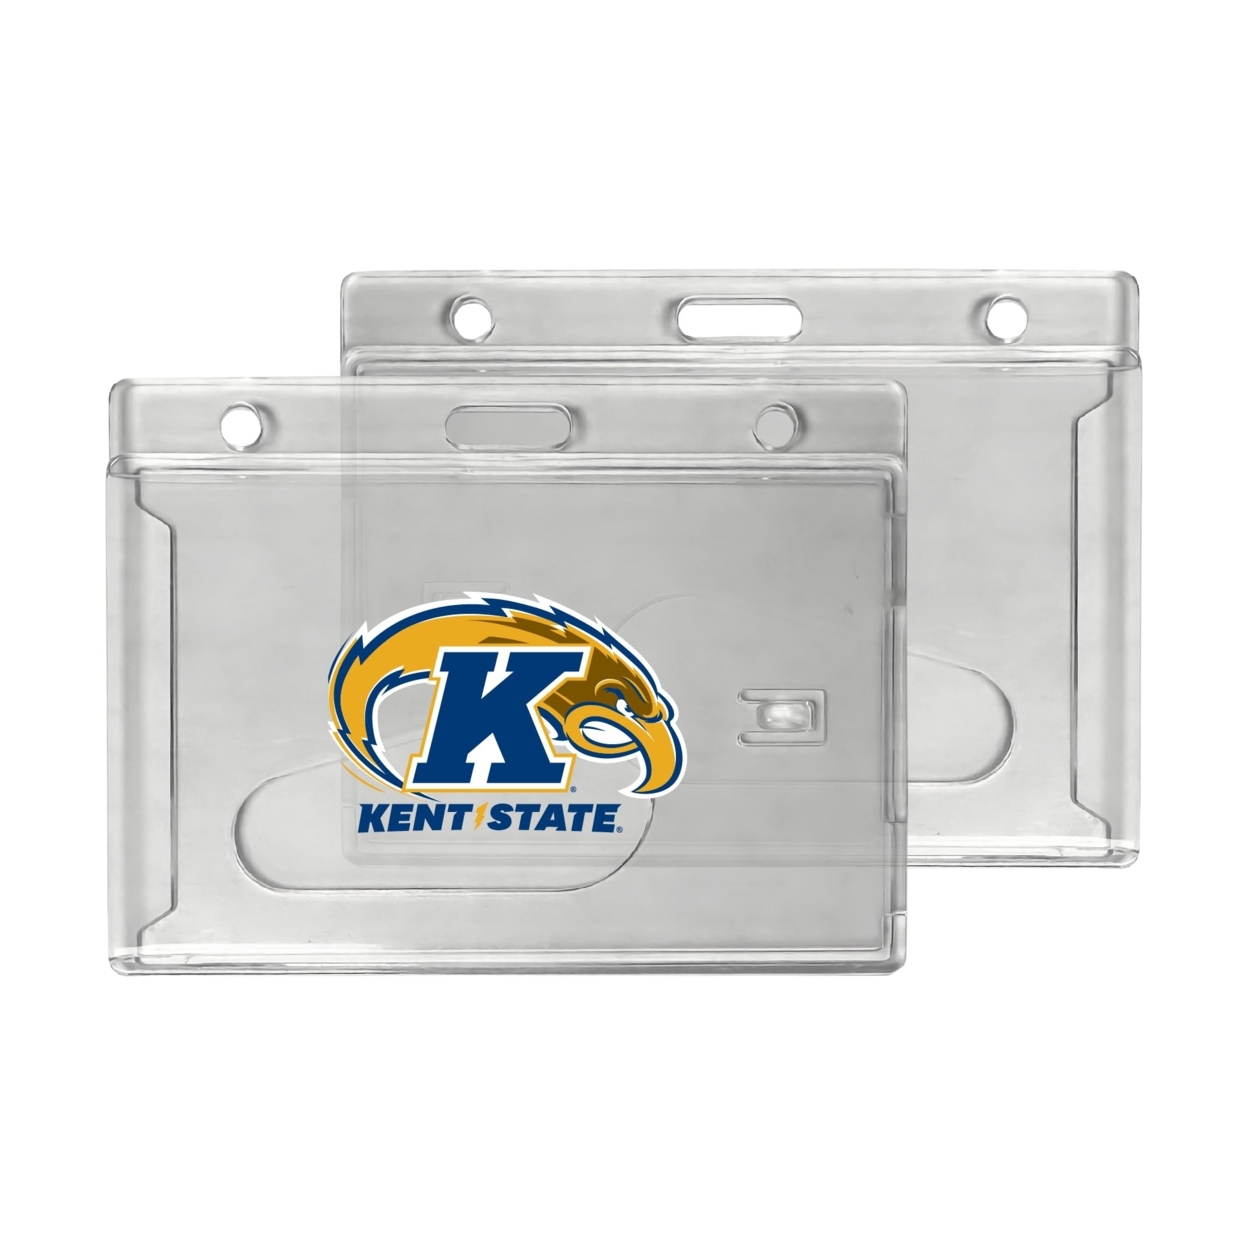 Kent State University Clear View ID Holder